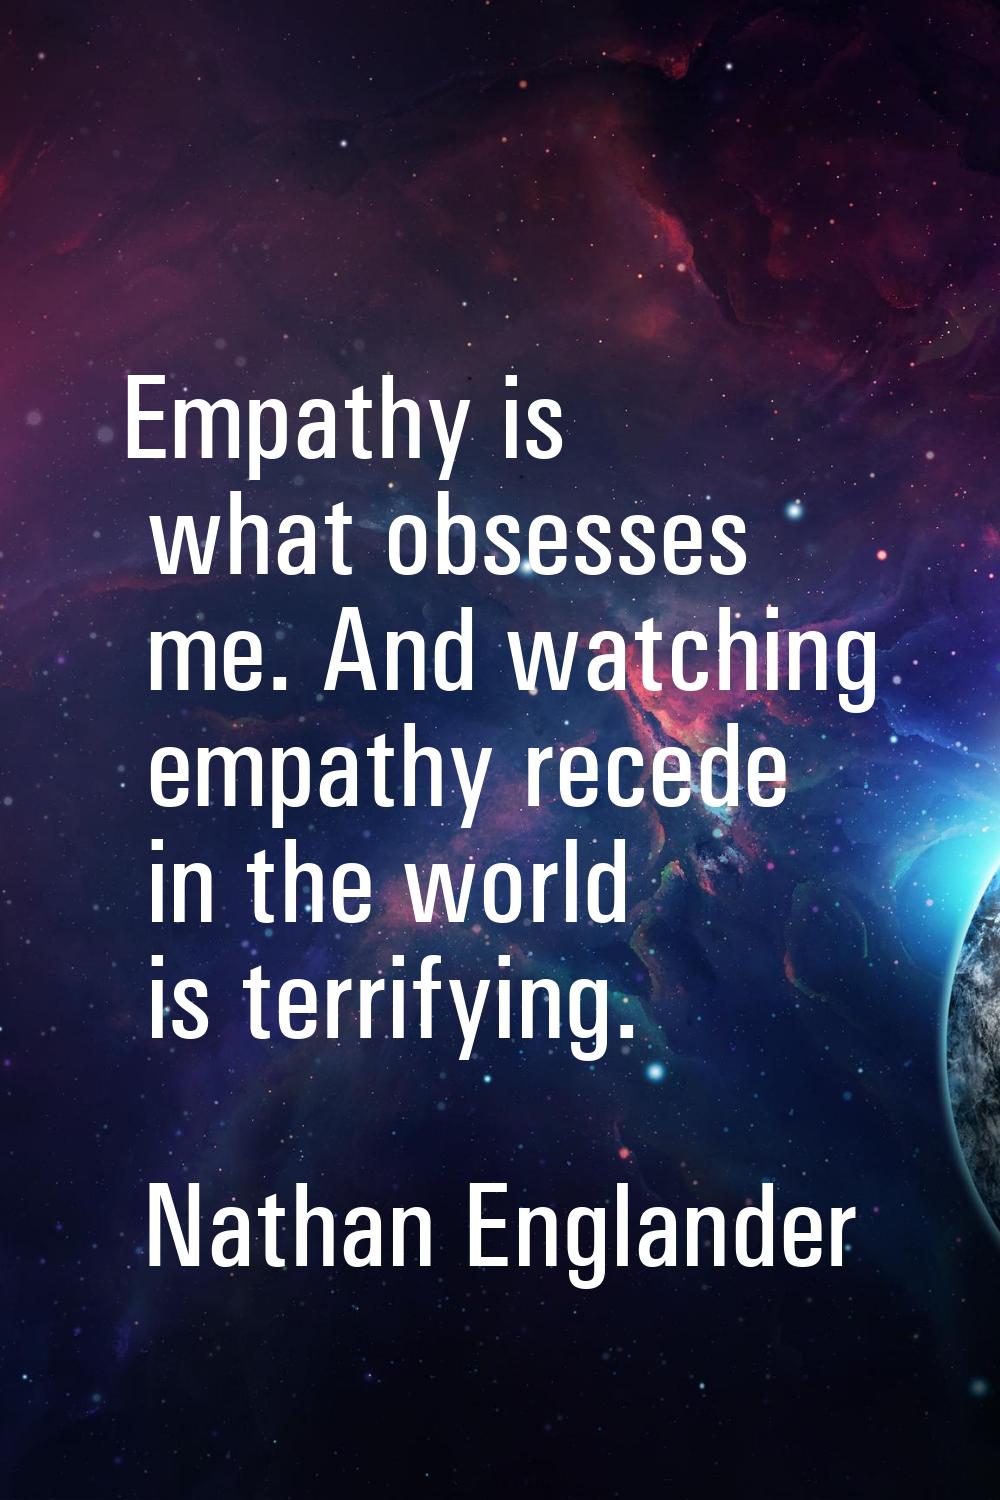 Empathy is what obsesses me. And watching empathy recede in the world is terrifying.